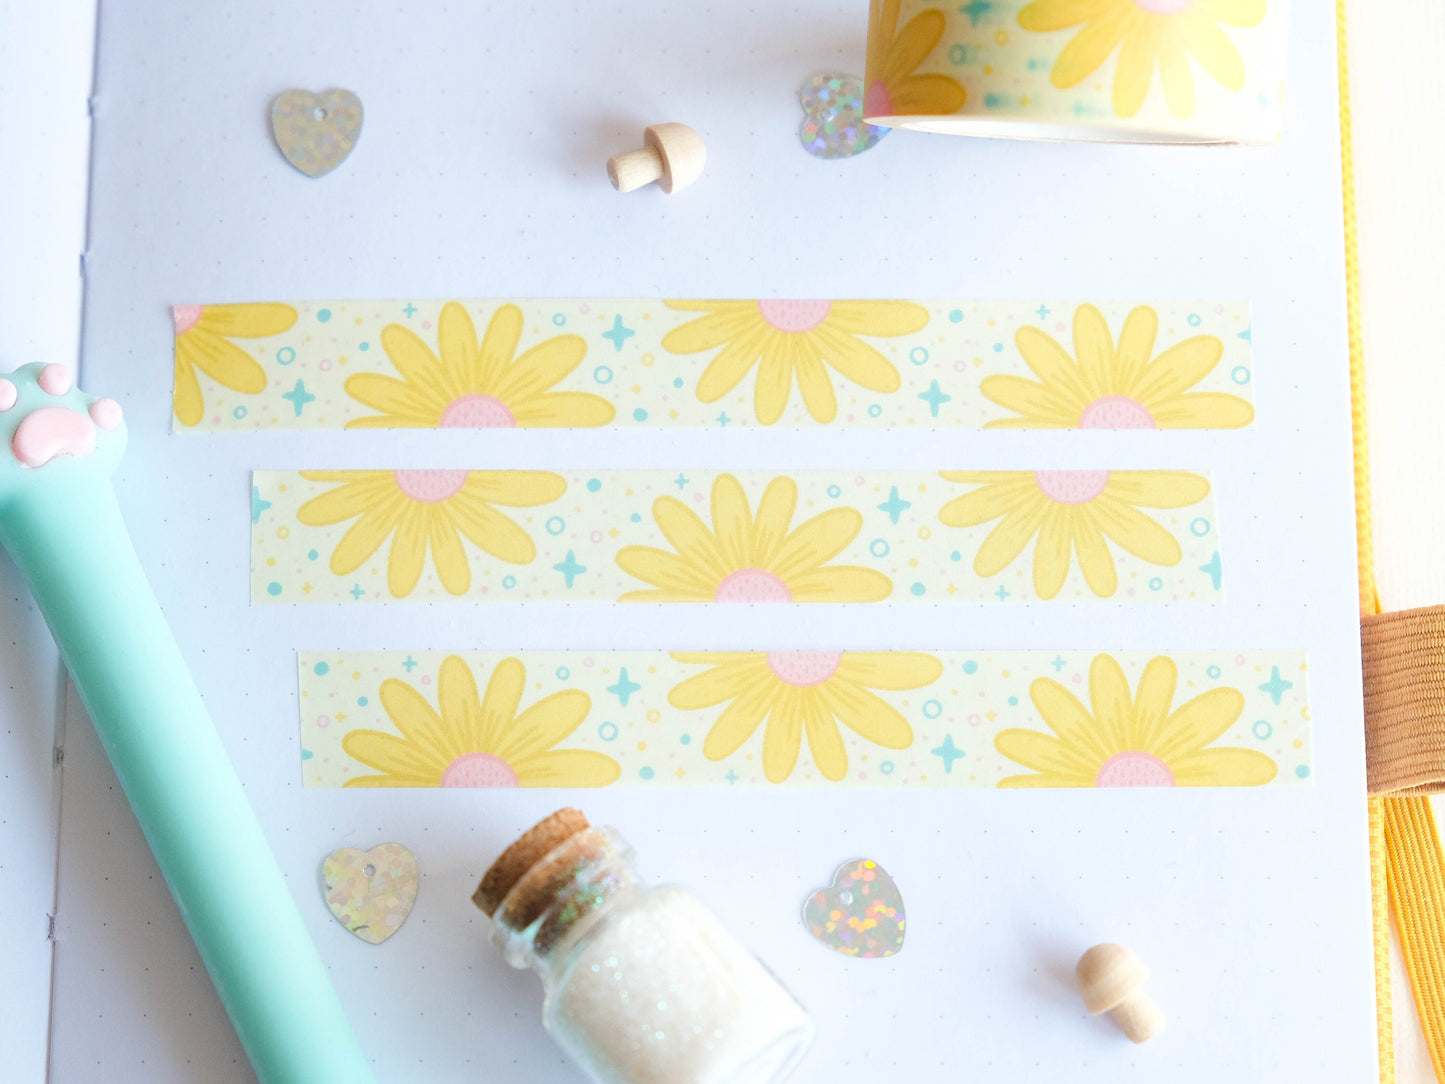 Washi tape kawaii flowers and daisies perfect for Spring 15mm x 10m - Masking tape flowers perfect to decorate bullet journal